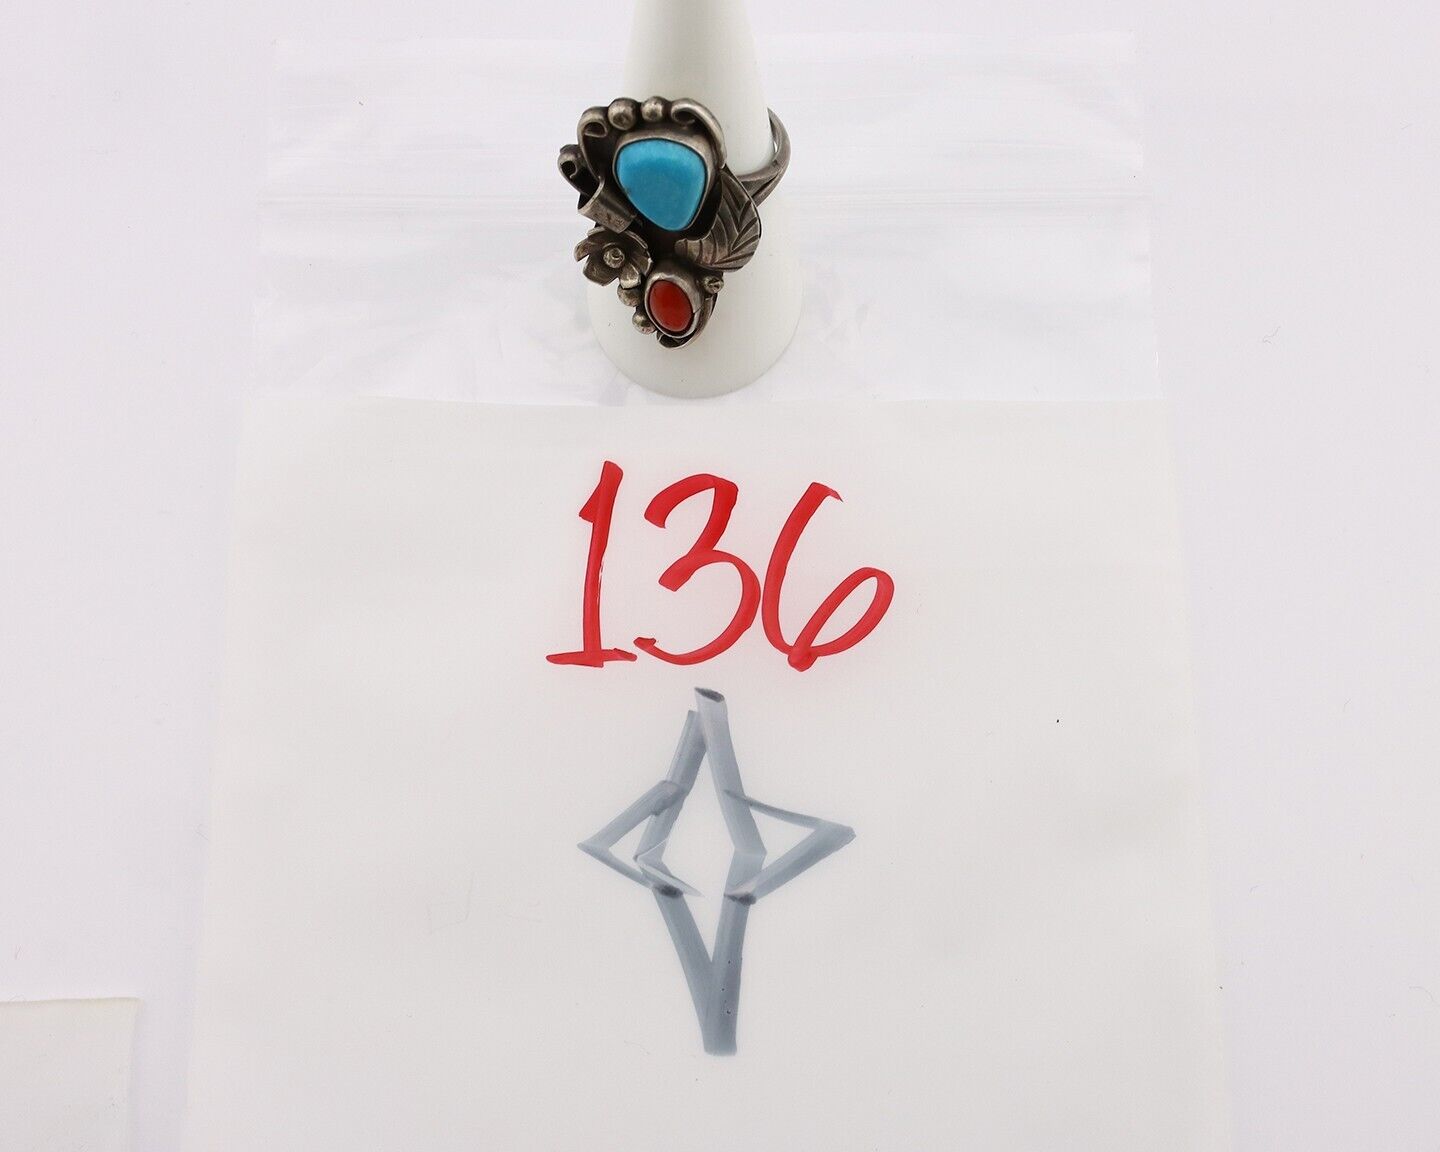 Navajo Handmade Ring 925 Silver Turquiose & Coral Artist Signed WJ C.80's